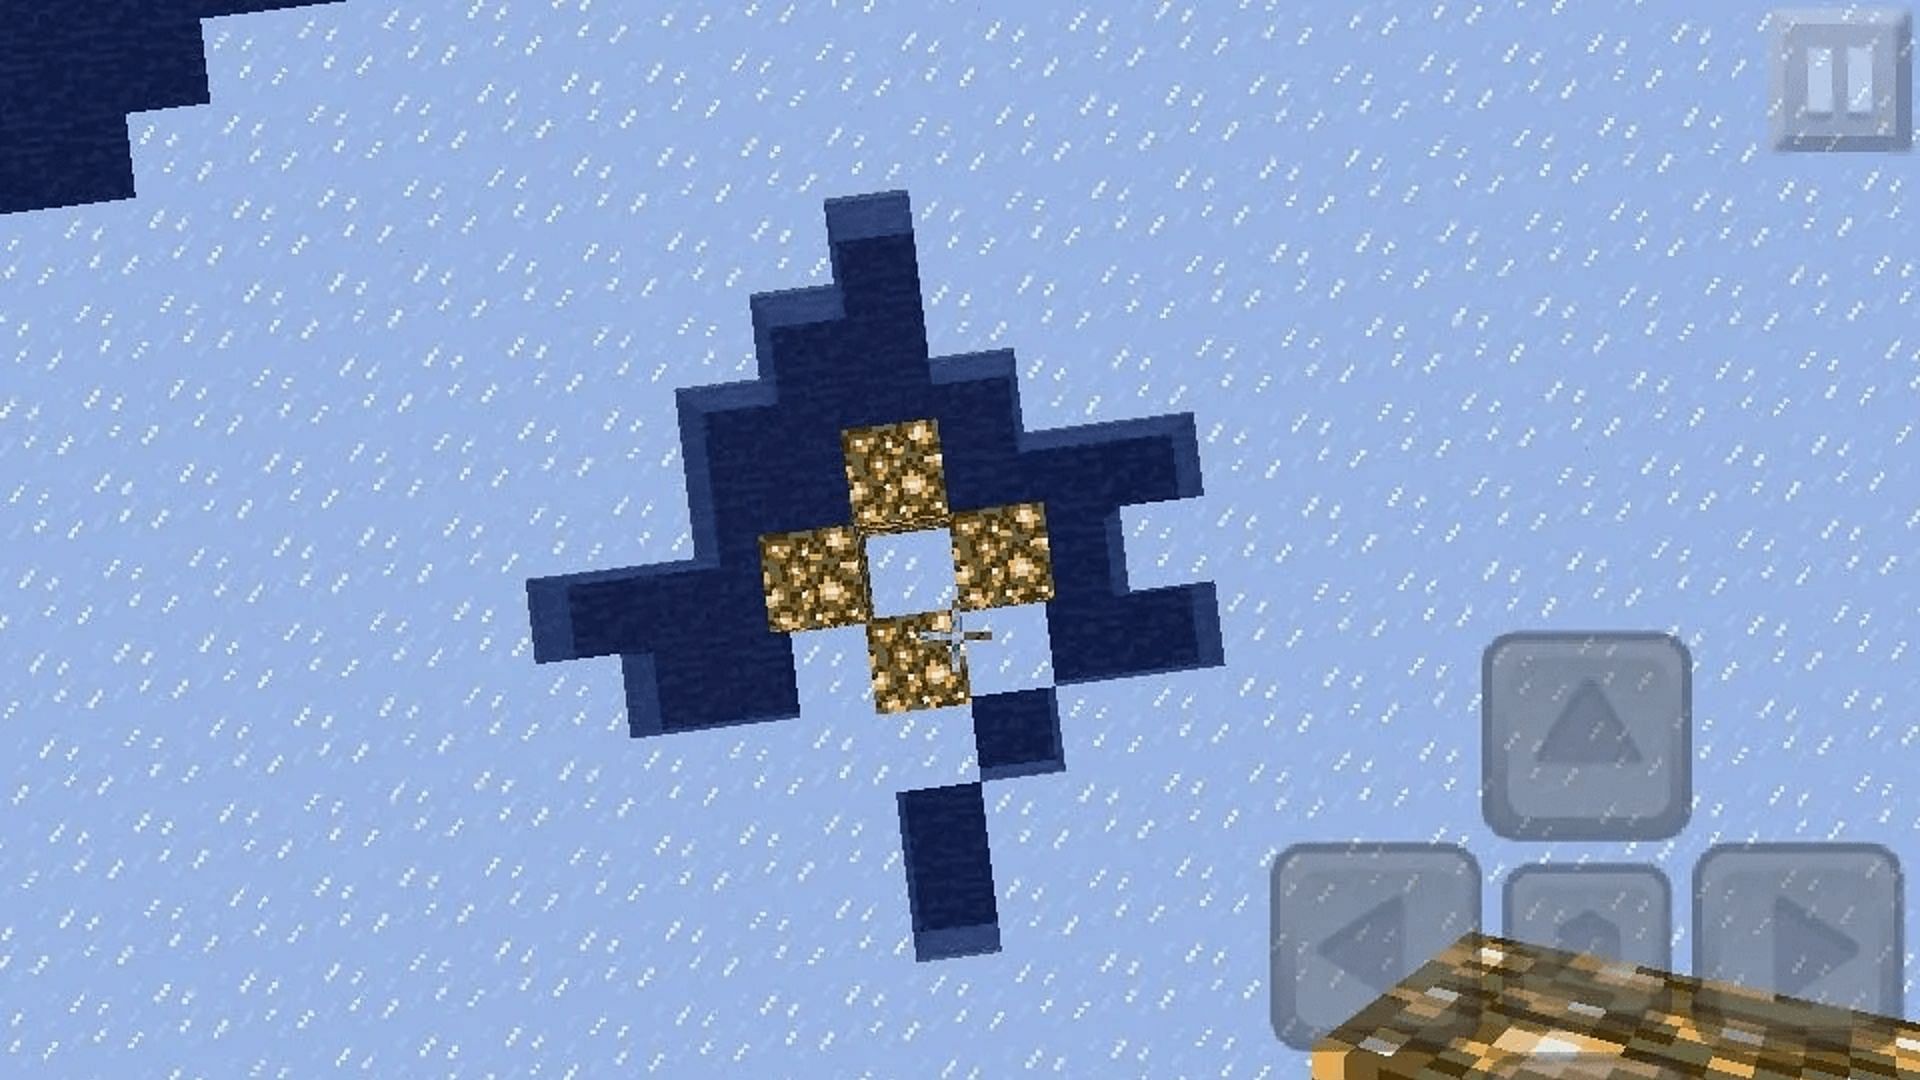 The state of ice and light levels are intertwined in Minecraft (Image via Mojang)